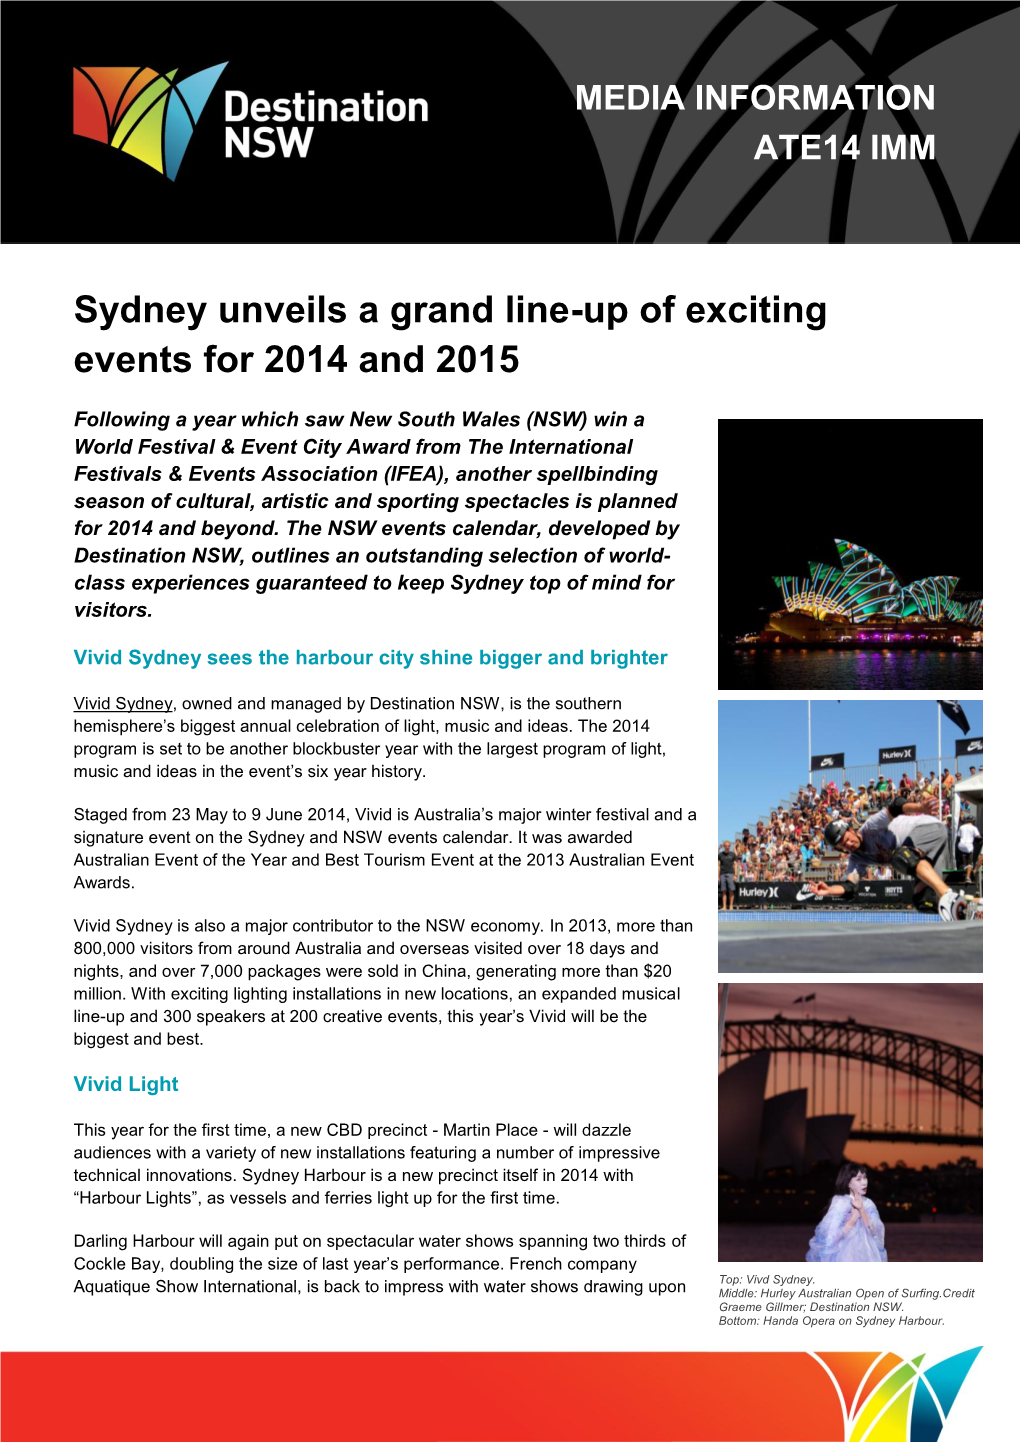 ATE14 Sydney Events Fact Sheet